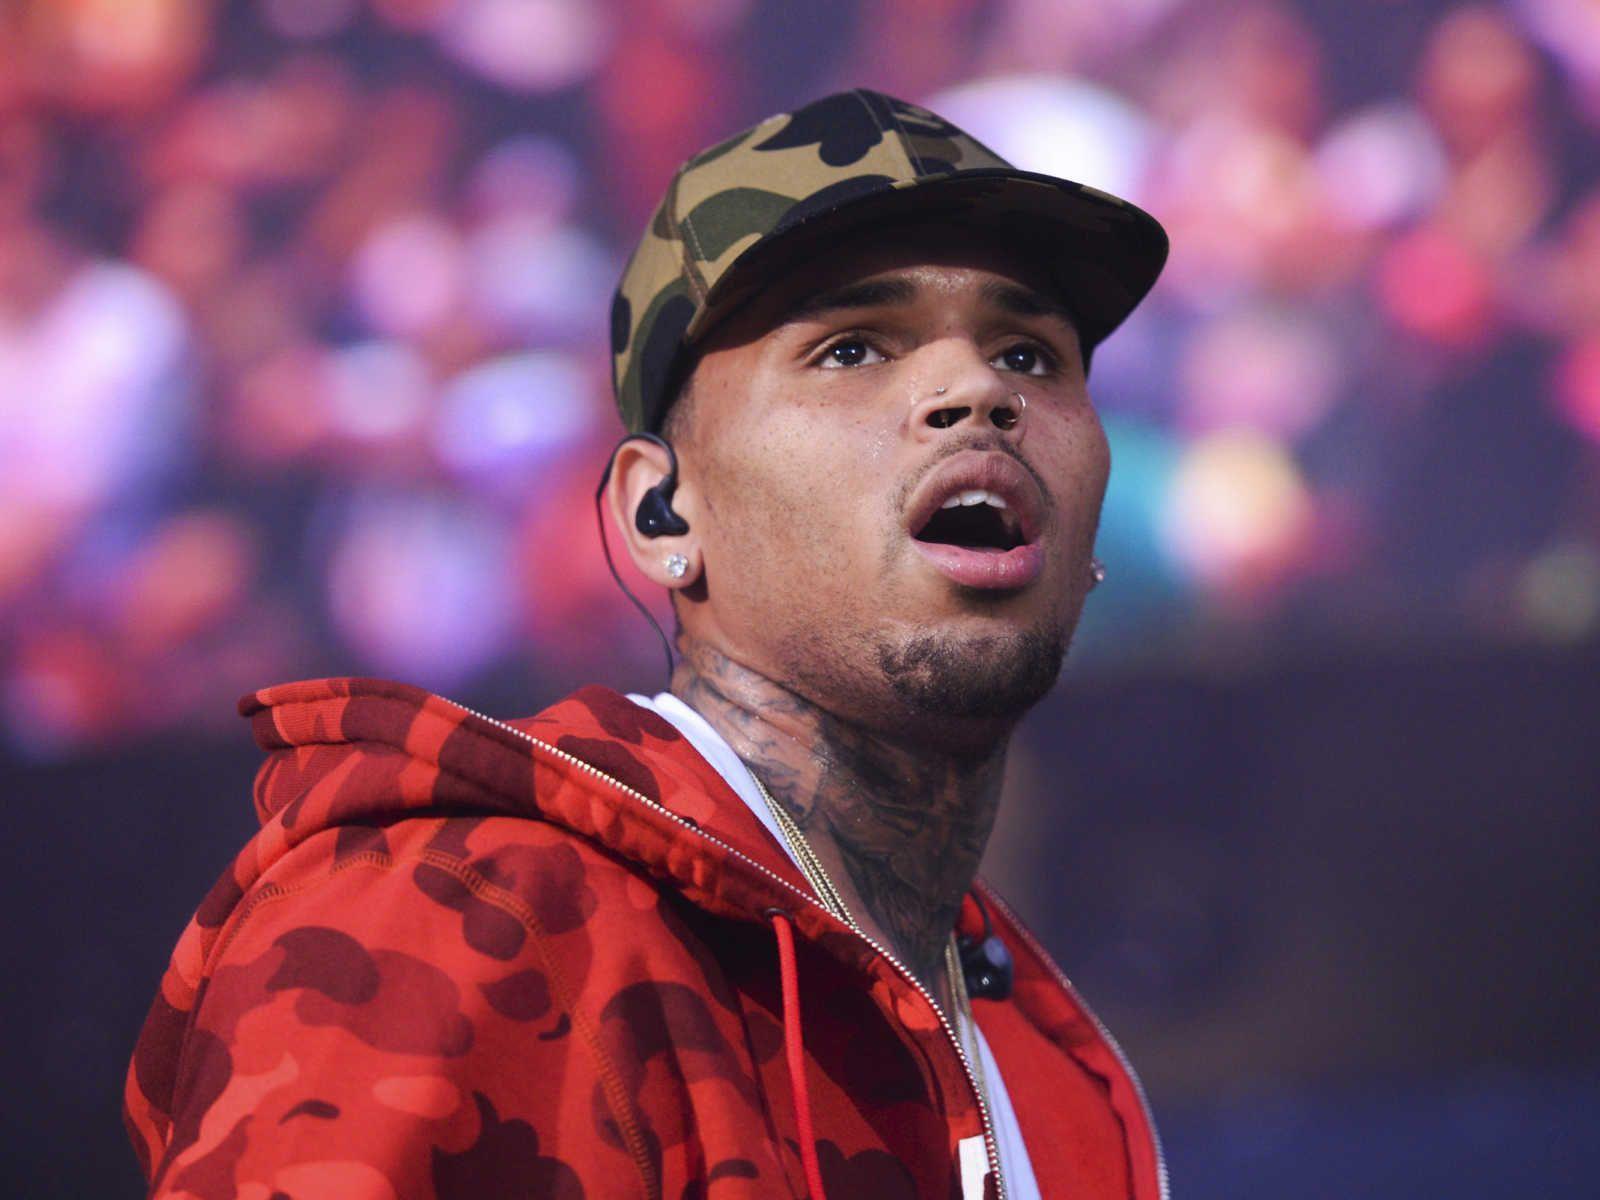 Judge orders R&B singer Chris Brown to stay away from ex